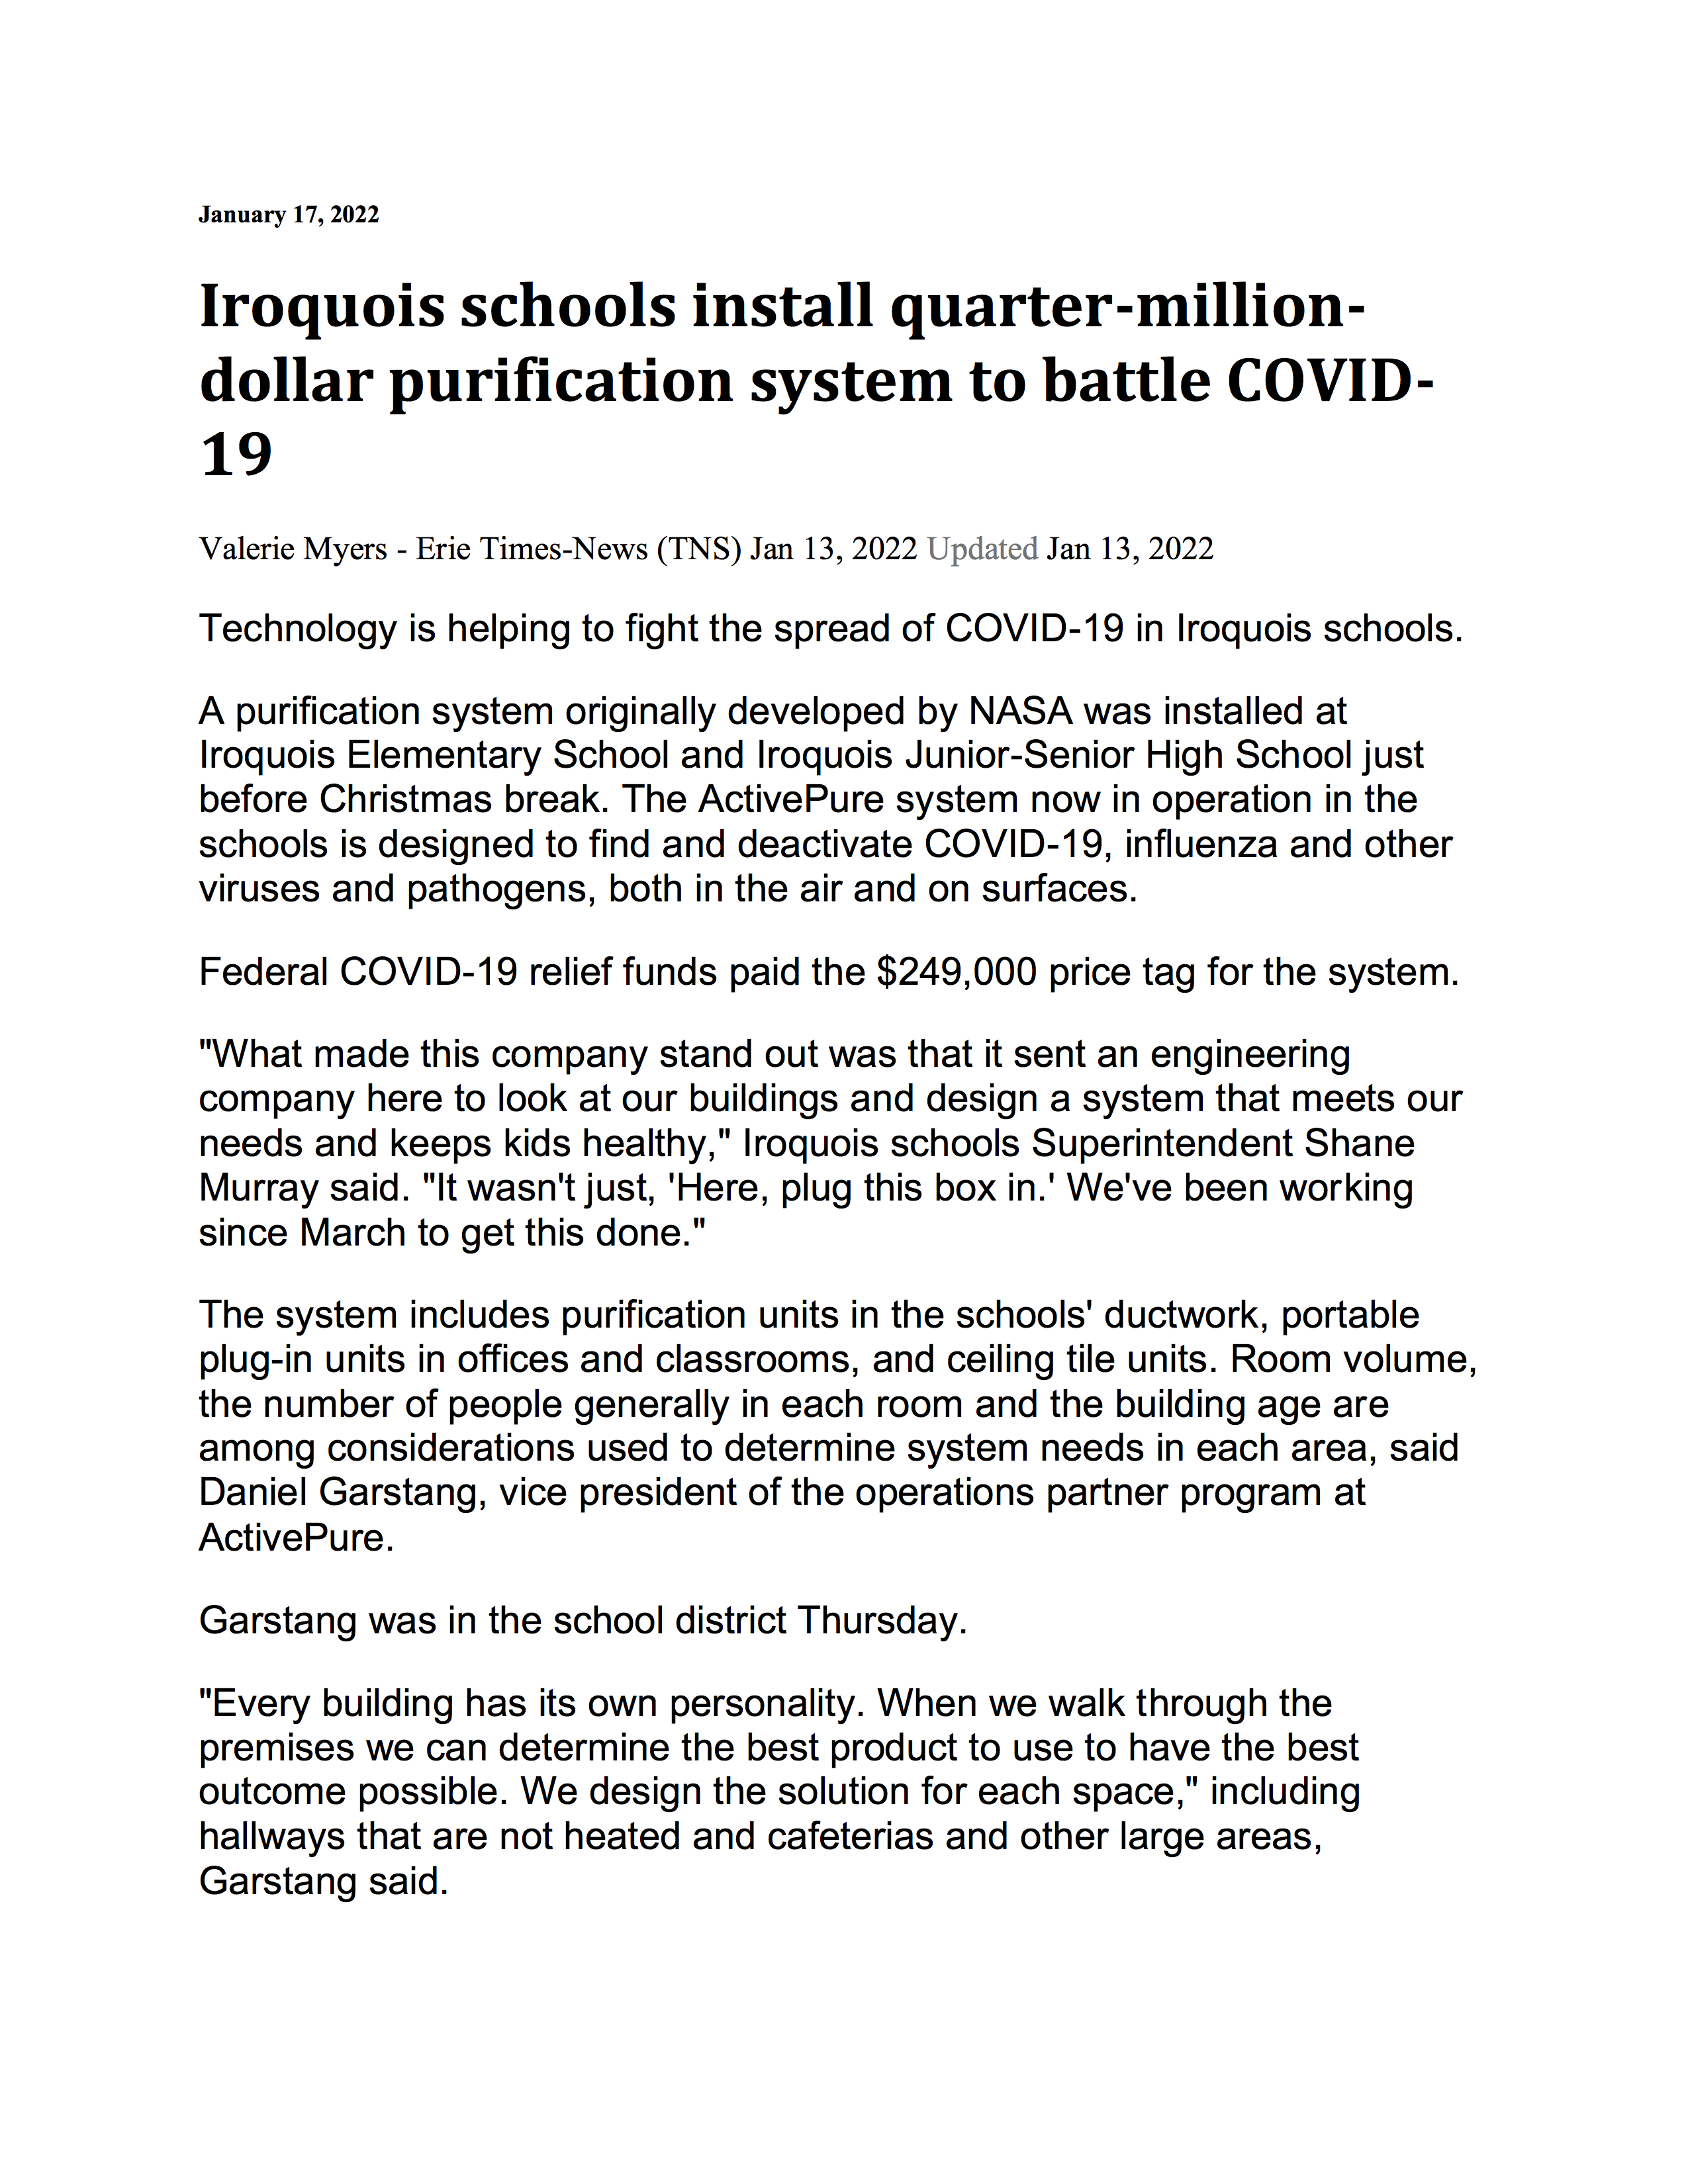 Iroquois News Article